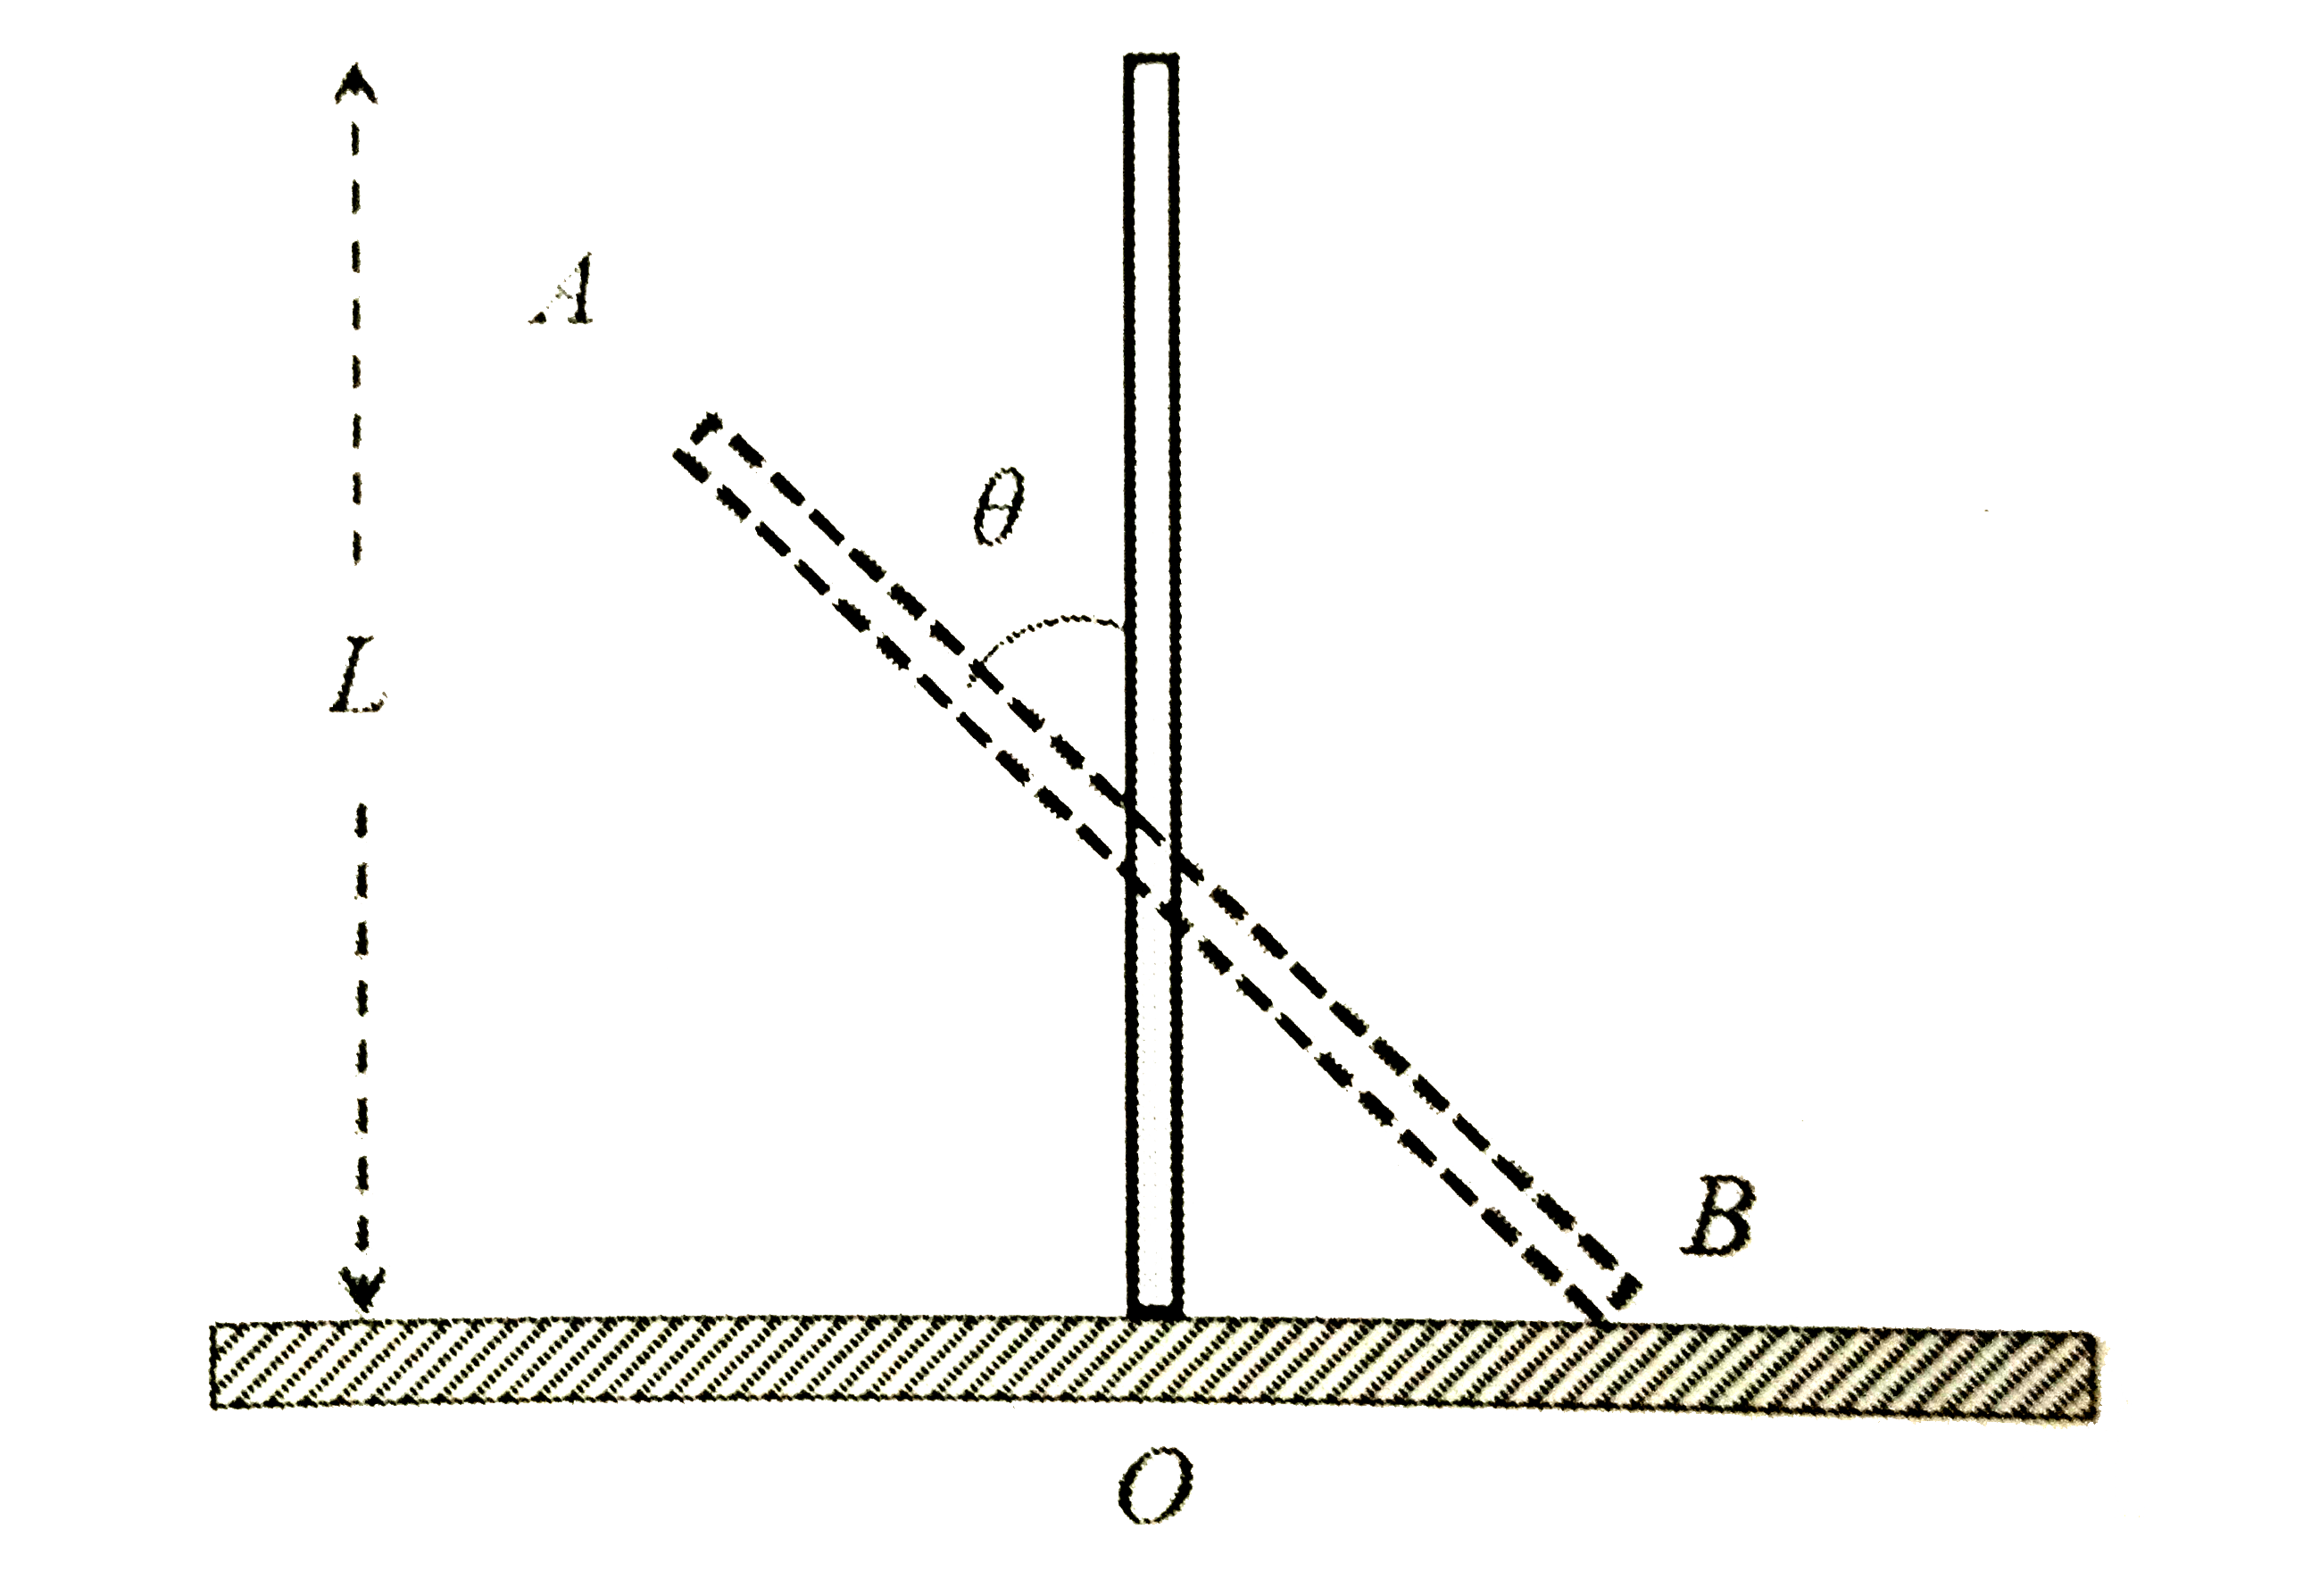 A rigid uniform bar AB of length ? is slipping from its vertical position on a frictionless floor (as shown in the figure). At some instant of time, the angle made by the bar with the vertical is theta. Which of the following statements about its motion is/are correct?